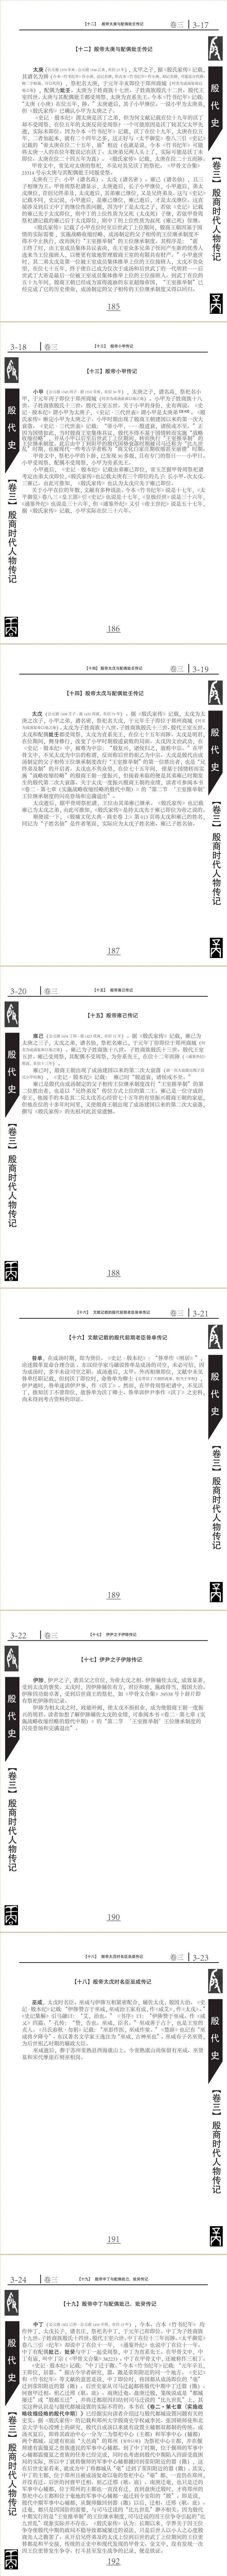 <span style='color:#FF0000;font-size:16px;font-style:none;font-weight:bold;text-decoration:none'>9_《殷代史》之九:卷三</span>